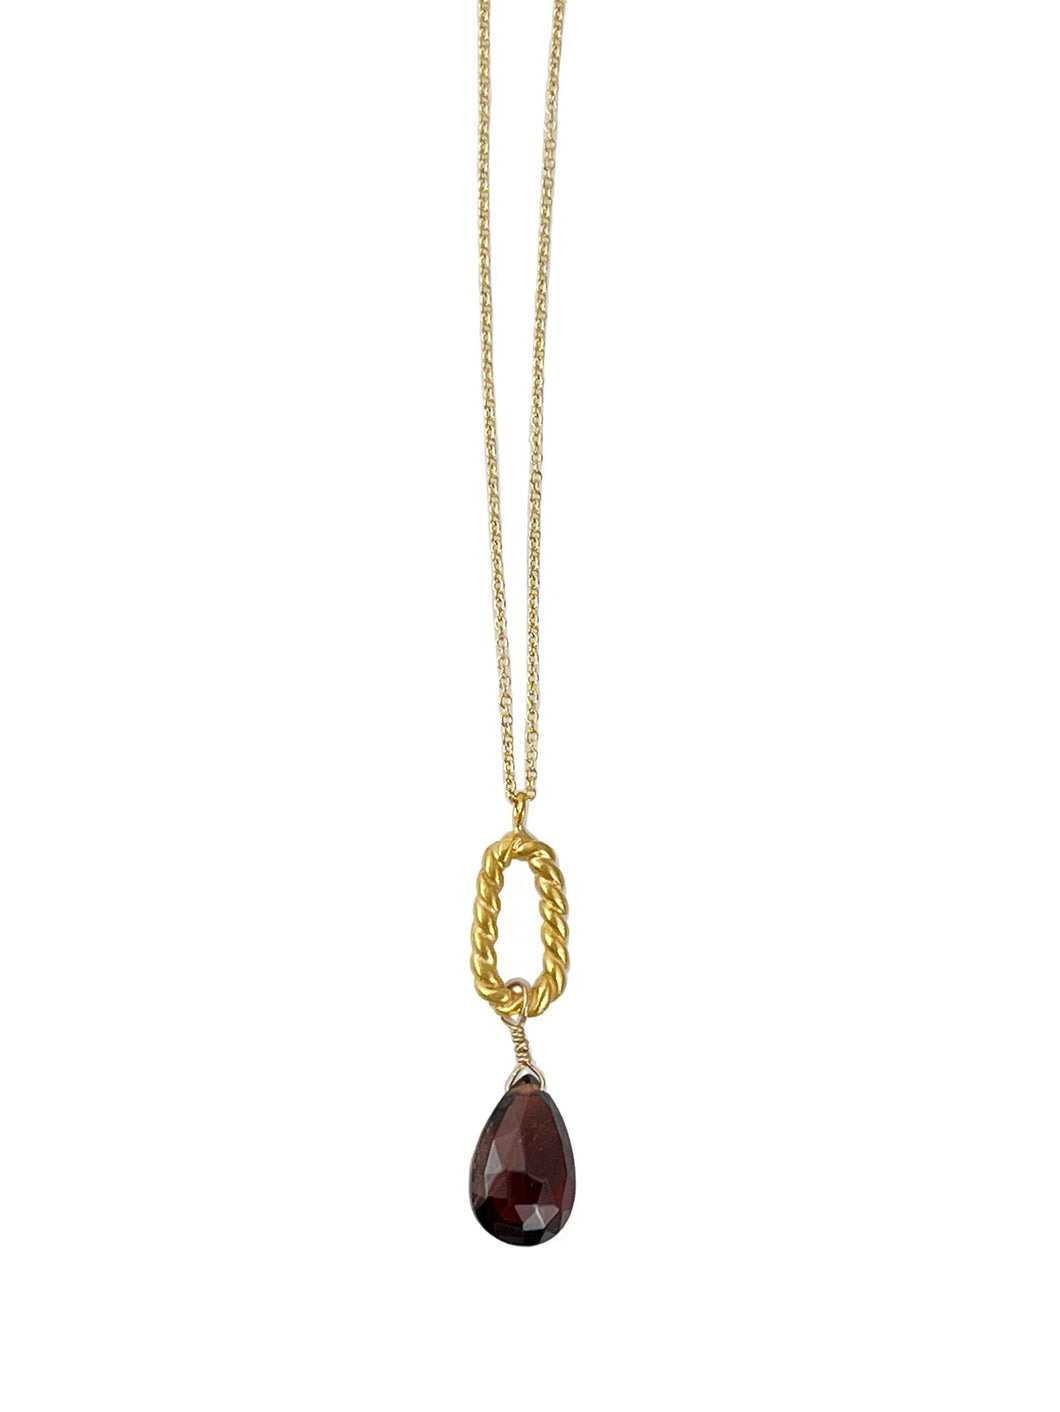 Twisted Oval with Garnet Drop Necklace - Vermeil